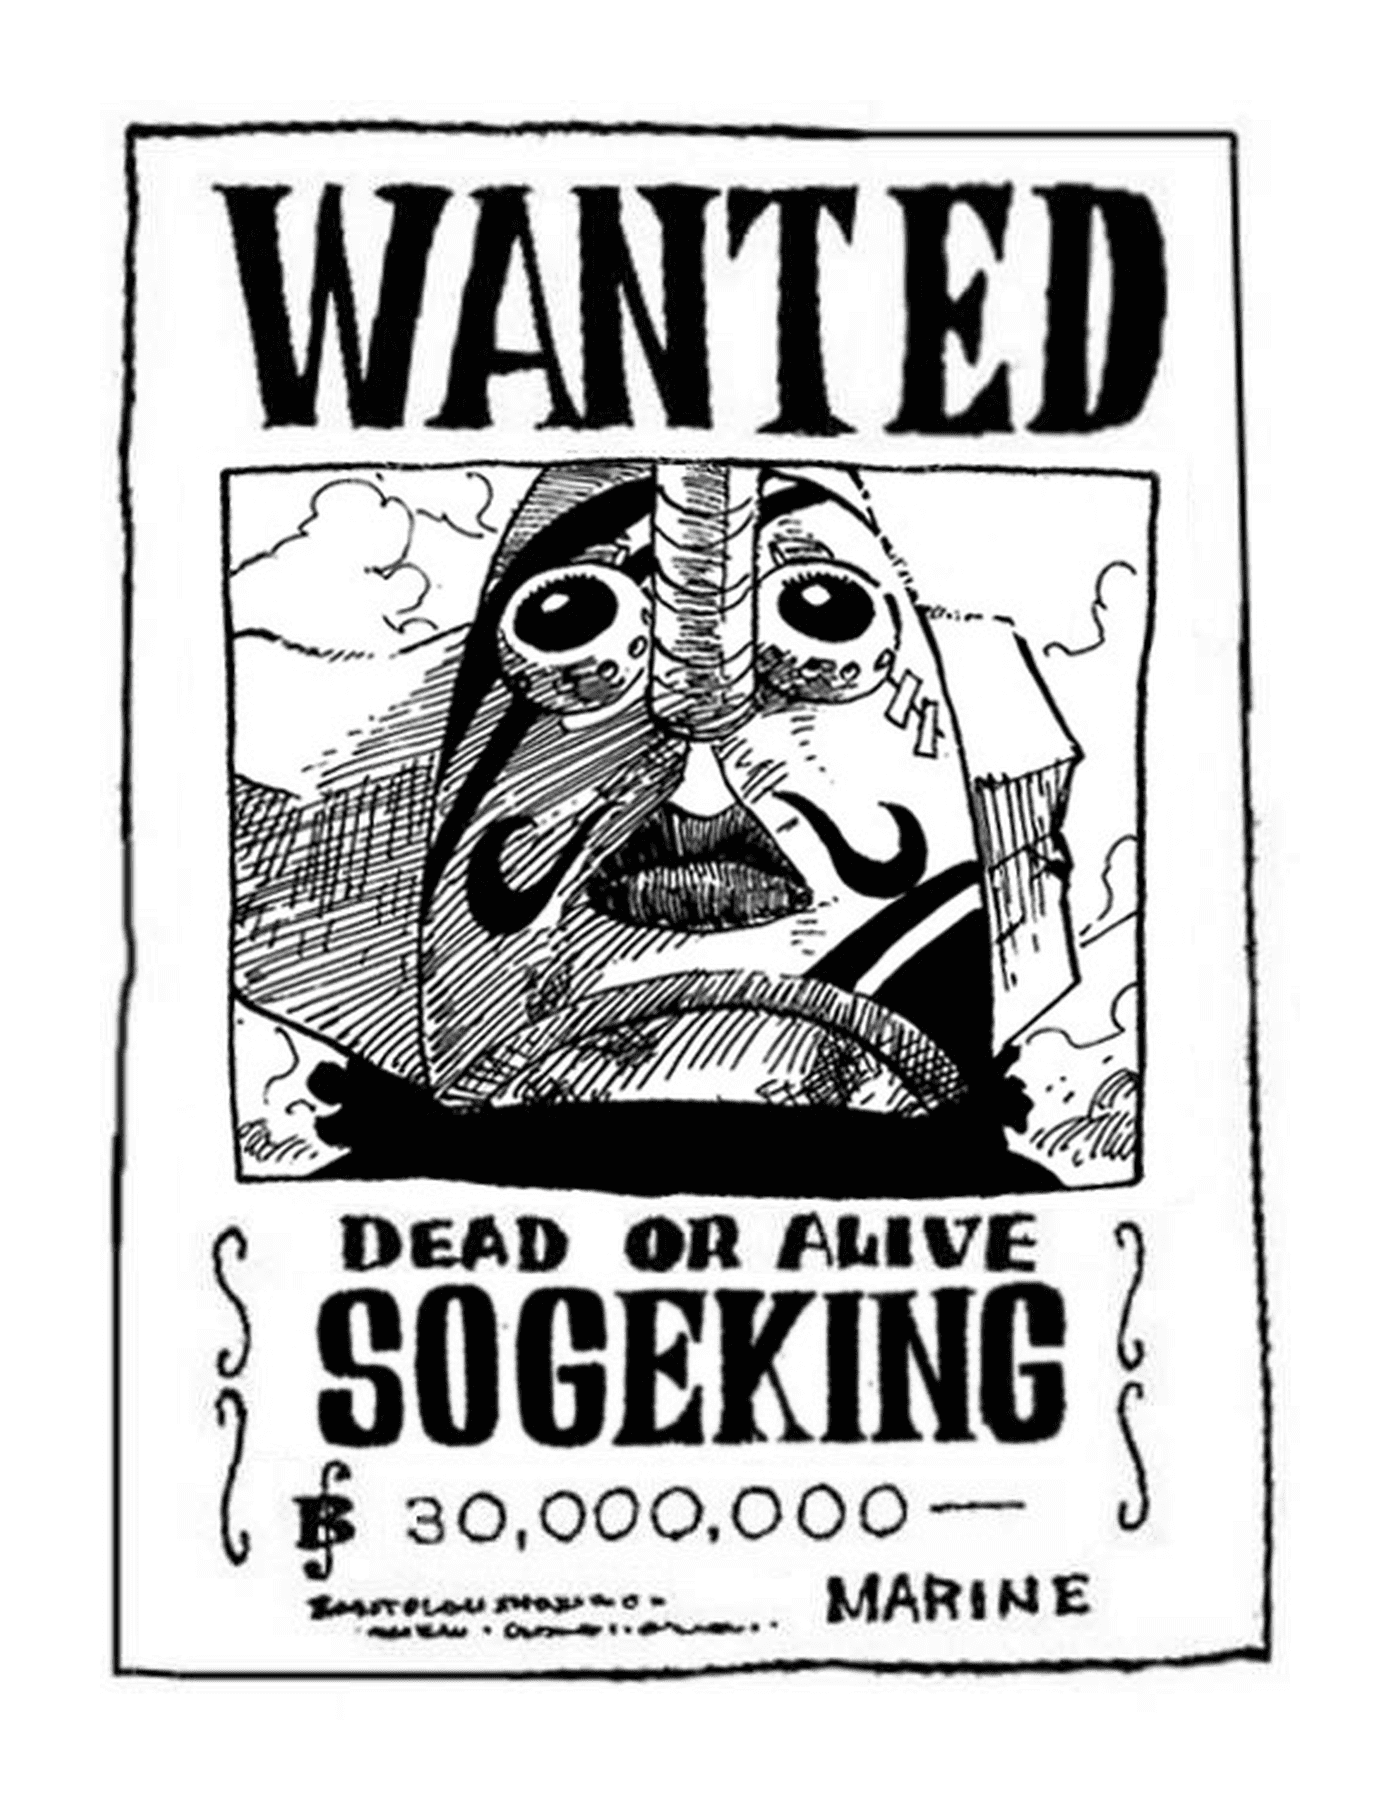  Wanted Sogeking, dead or alive 